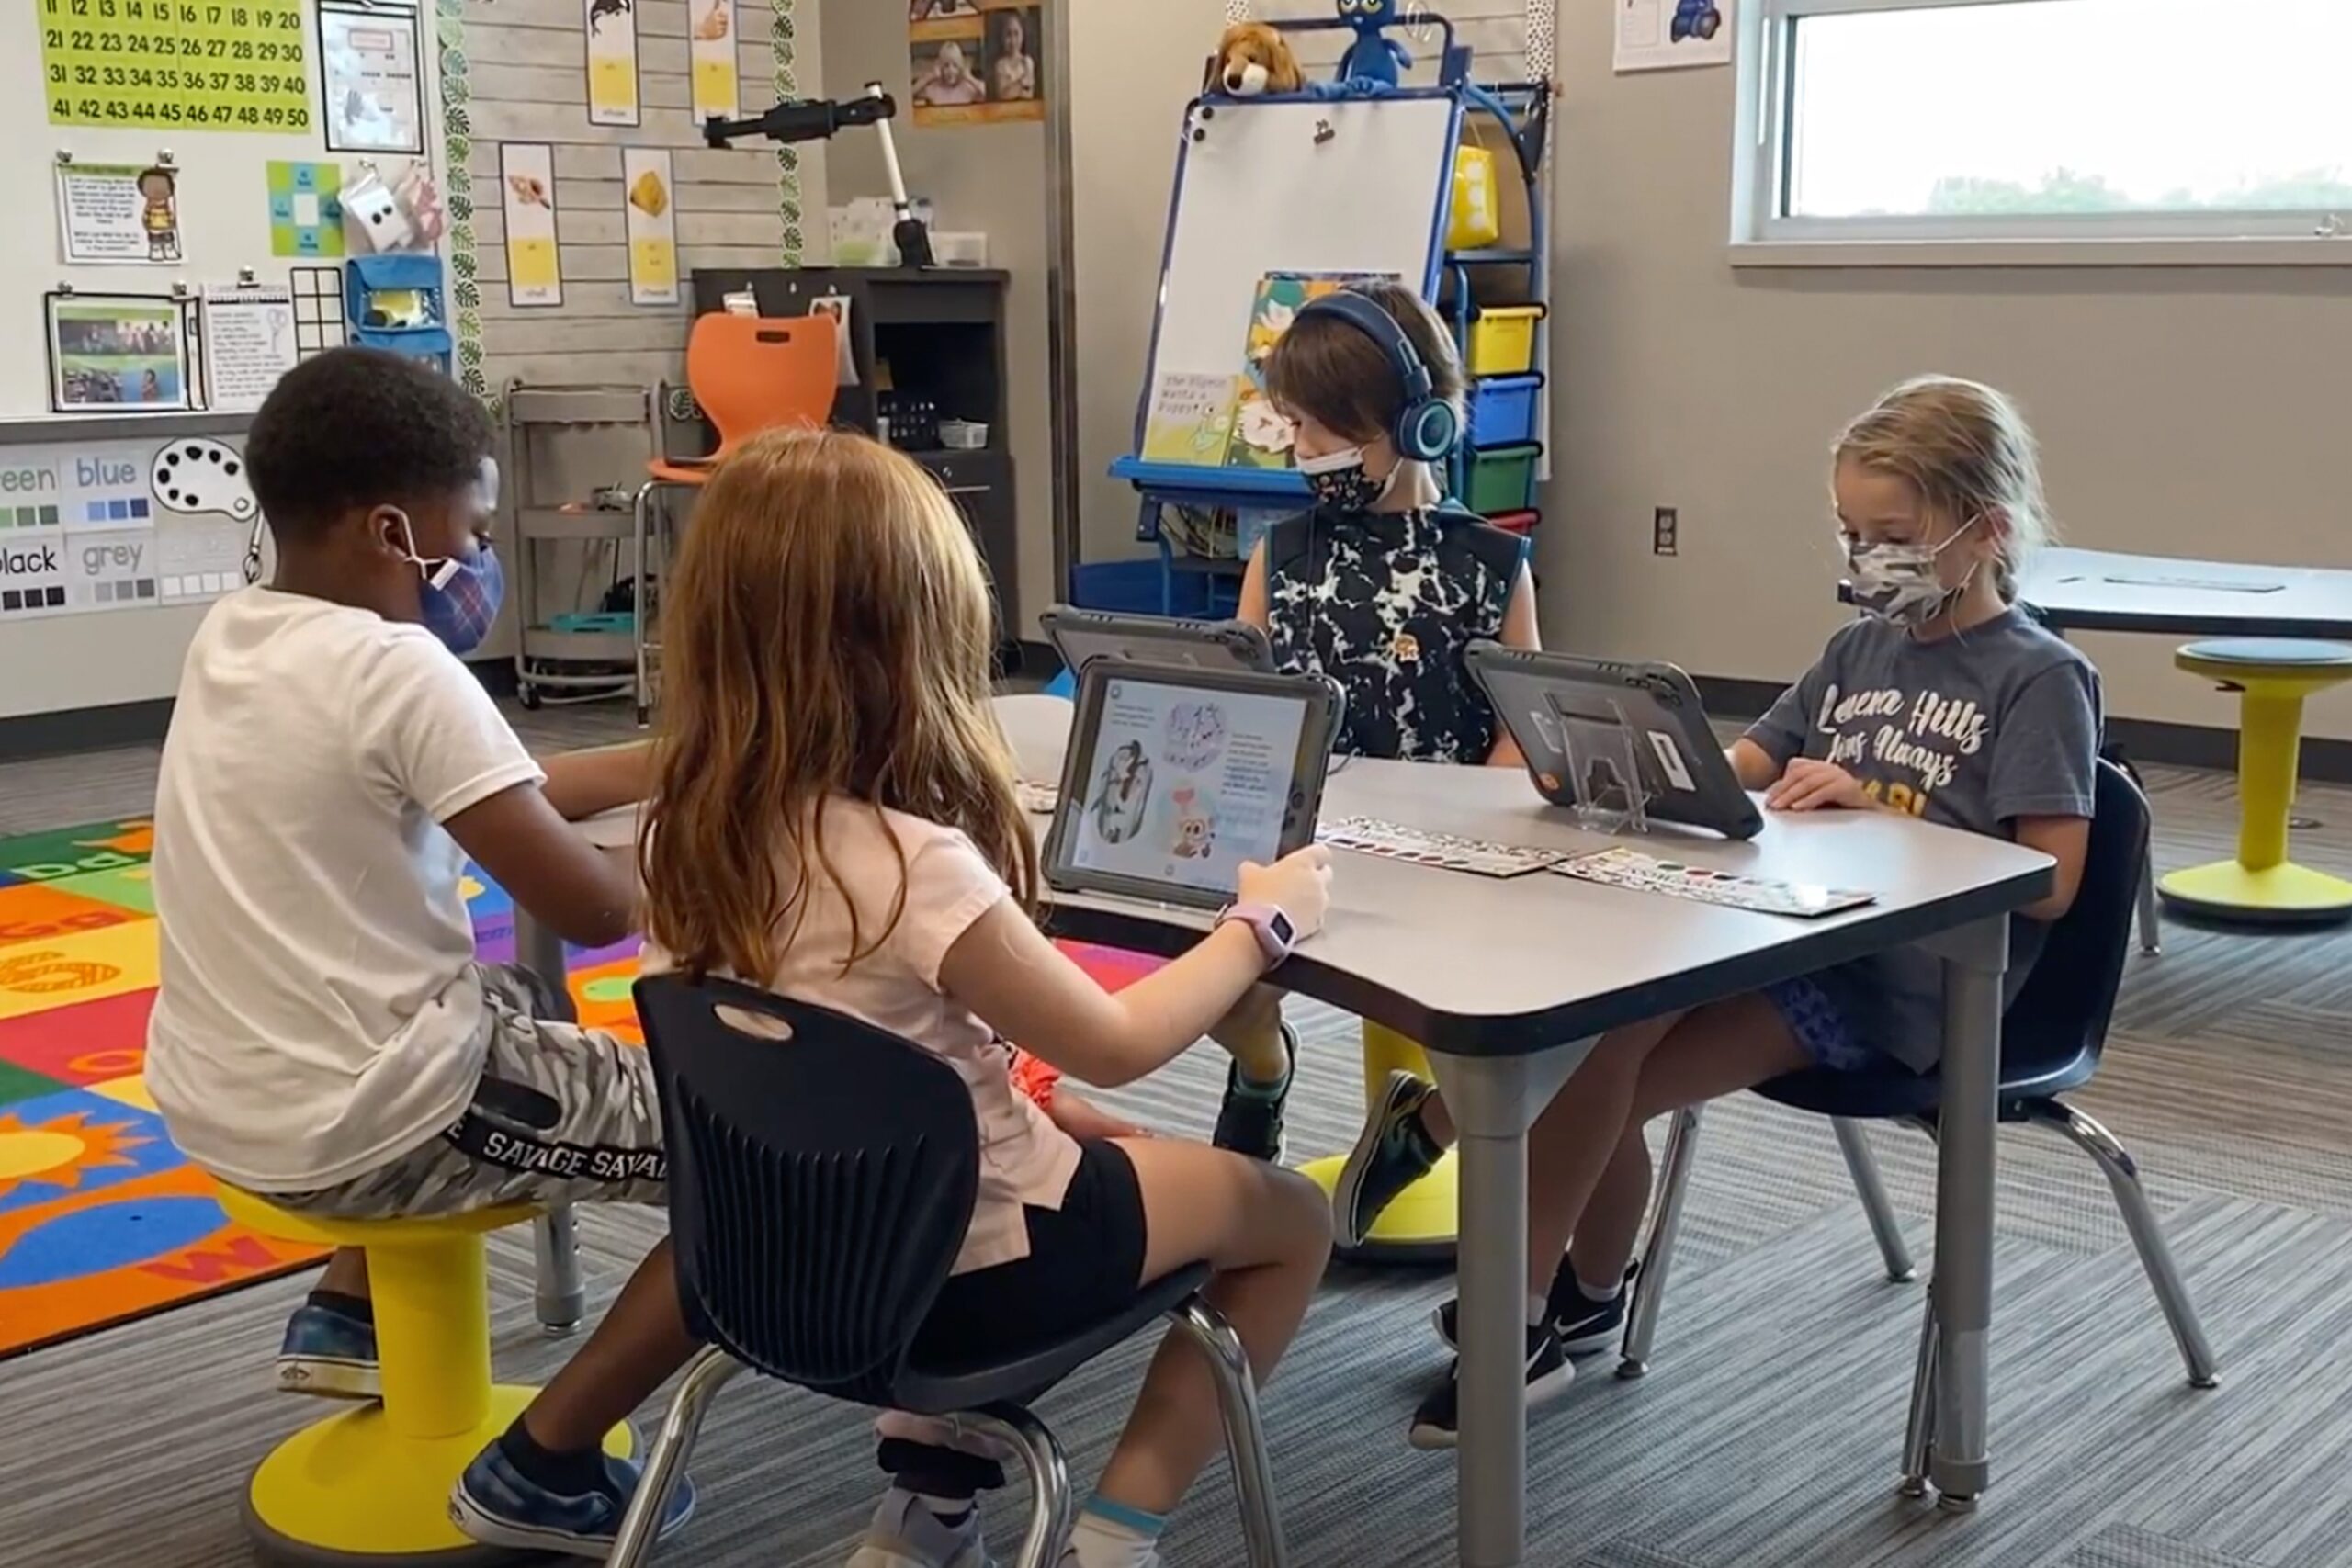 Four students use technology in the classroom during small groups. They are on their iPads, completely focused on independent work.